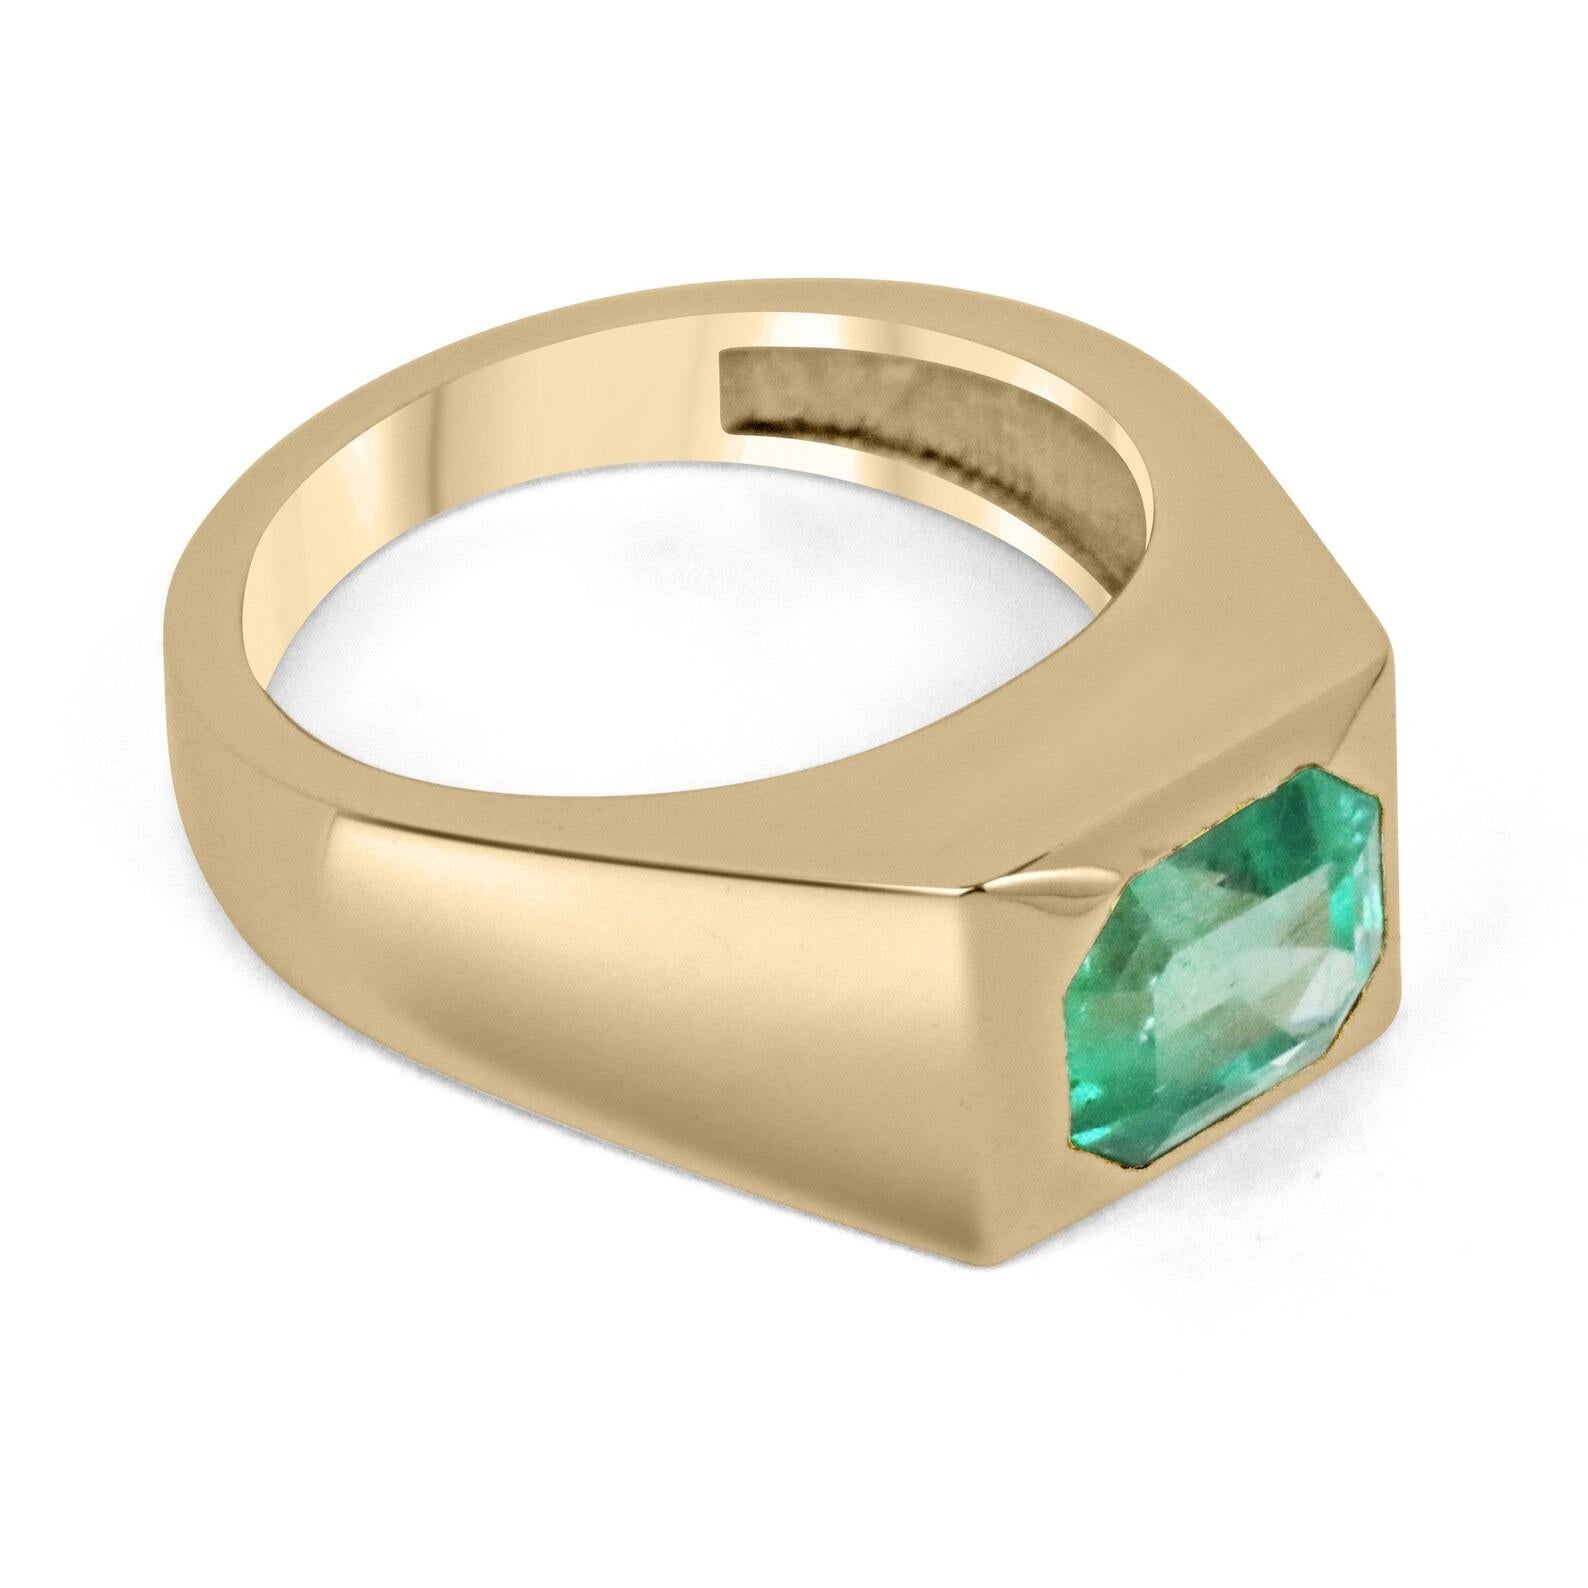 A gorgeous and chunky solitaire emerald ring. This luminous piece features a 2.66-carat, natural Colombian emerald asscher cut with remarkable characteristics such as its vivacious spring medium green color, excellent luster, and very good eye